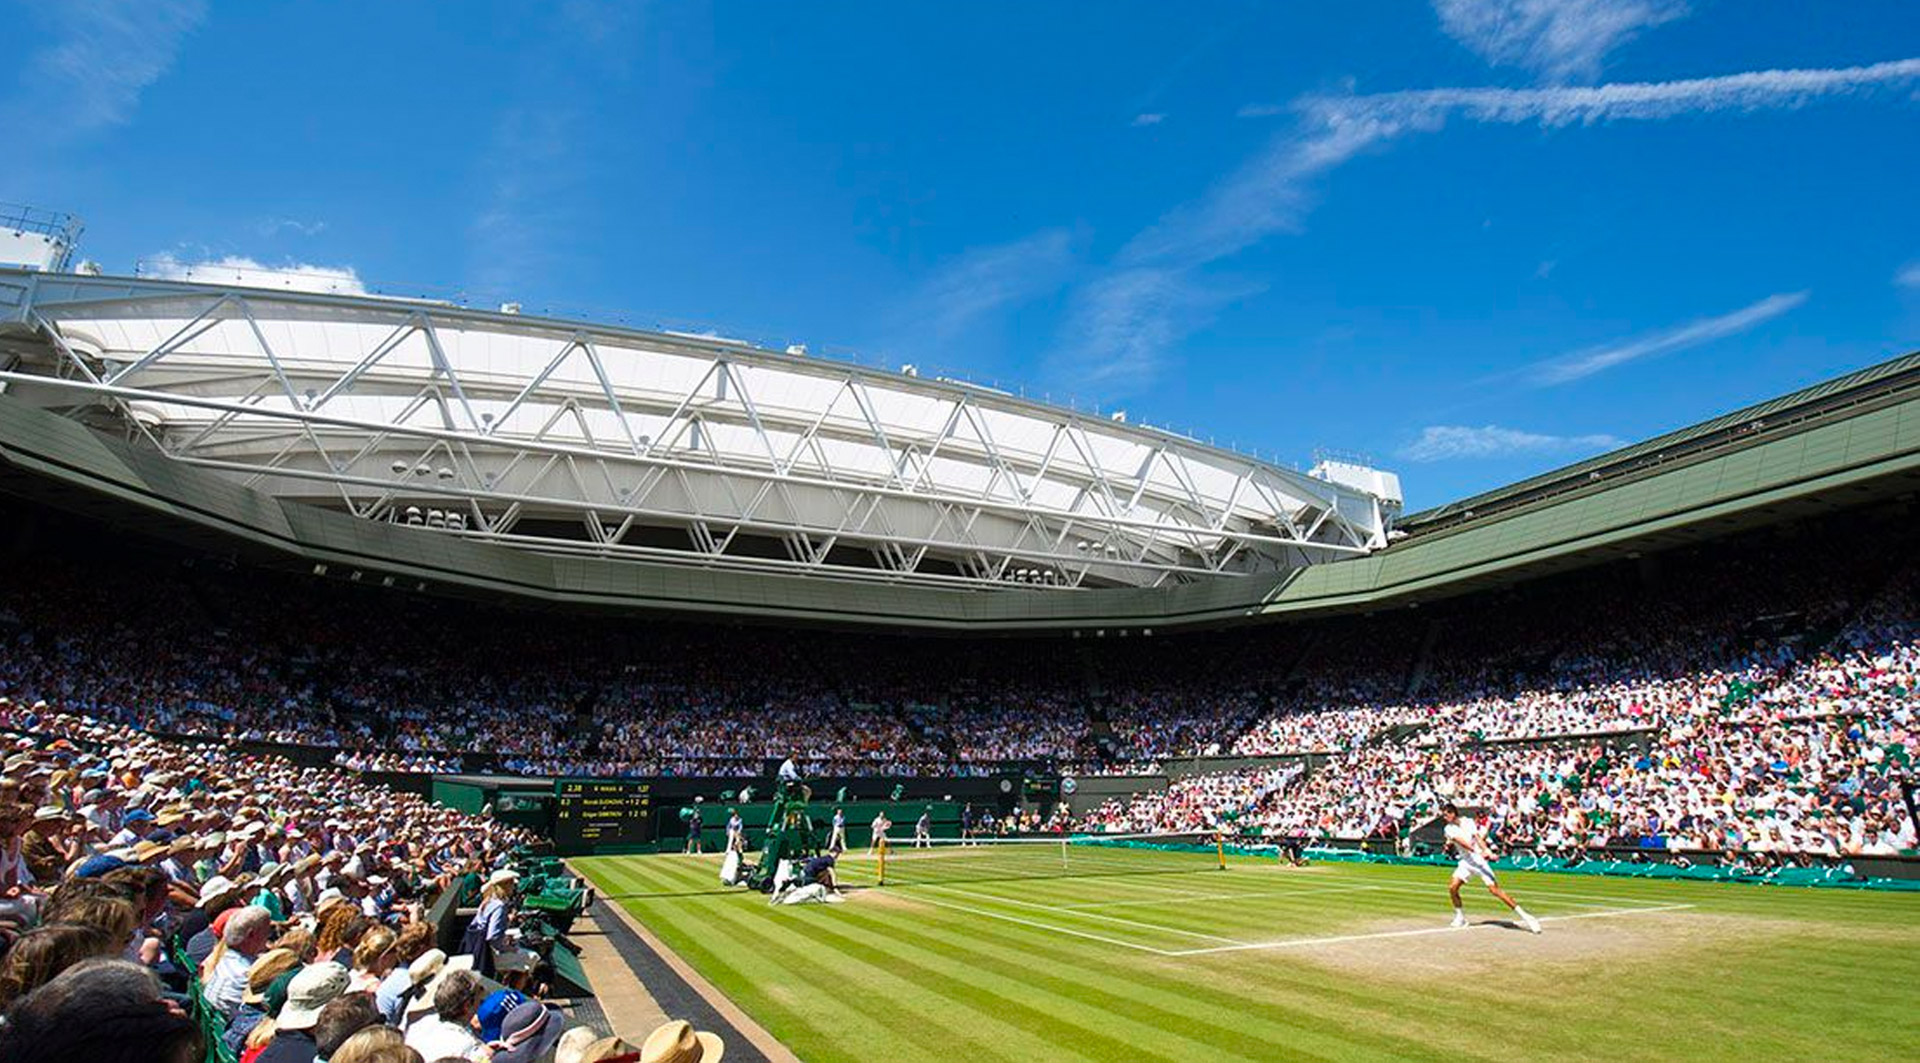 WHAT TO KNOW ABOUT THE WIMBLEDON 2023 A1 Tennis